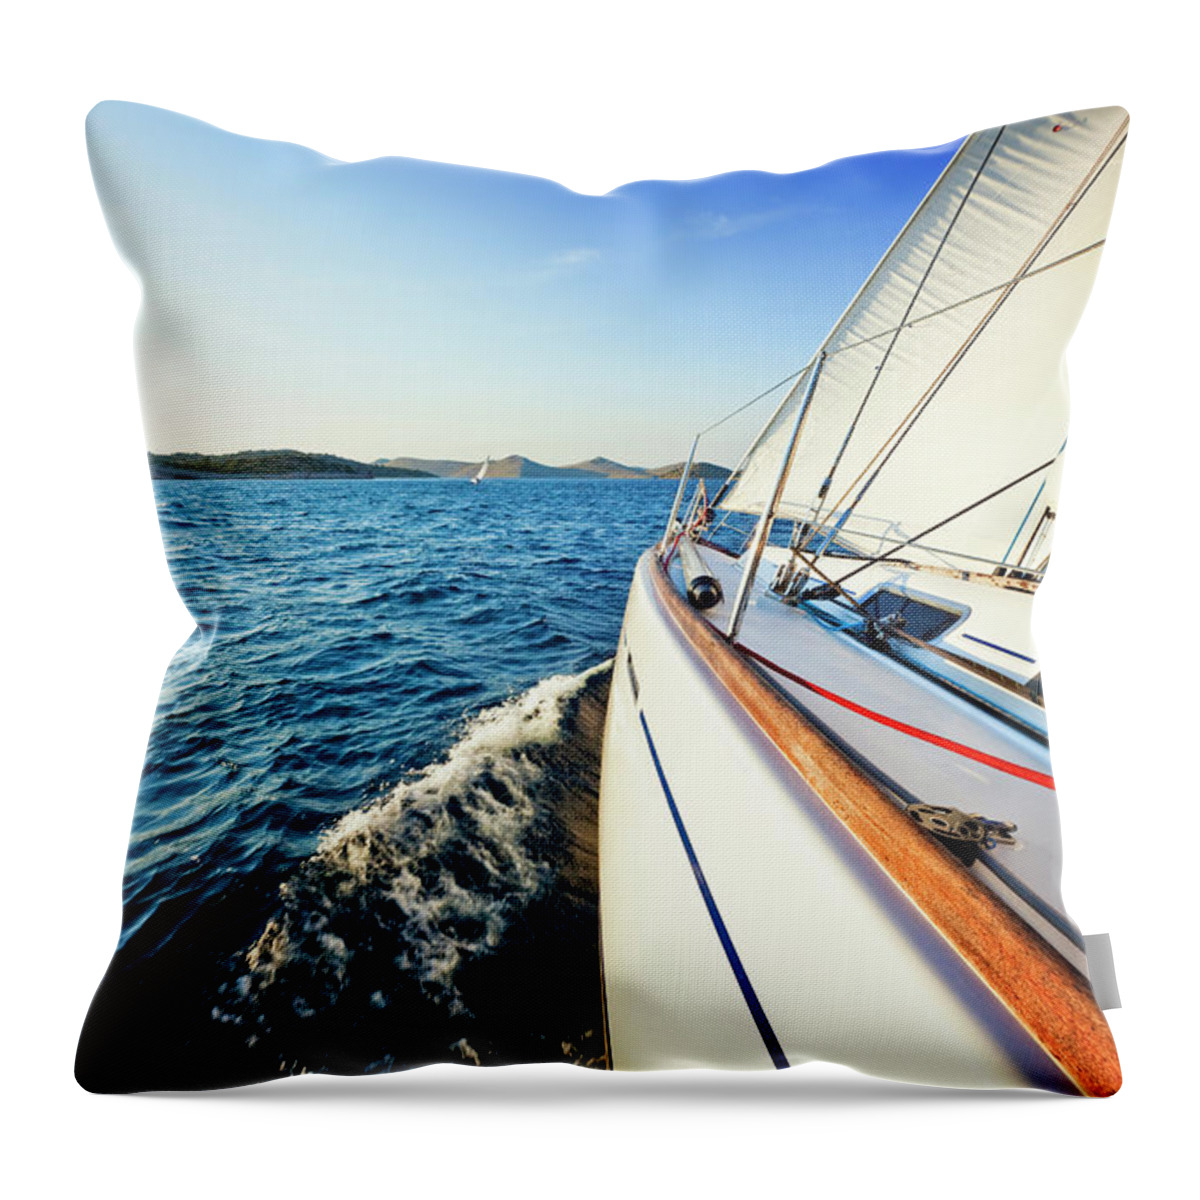 Curve Throw Pillow featuring the photograph Sailing In The Wind With Sailboat At by Mbbirdy